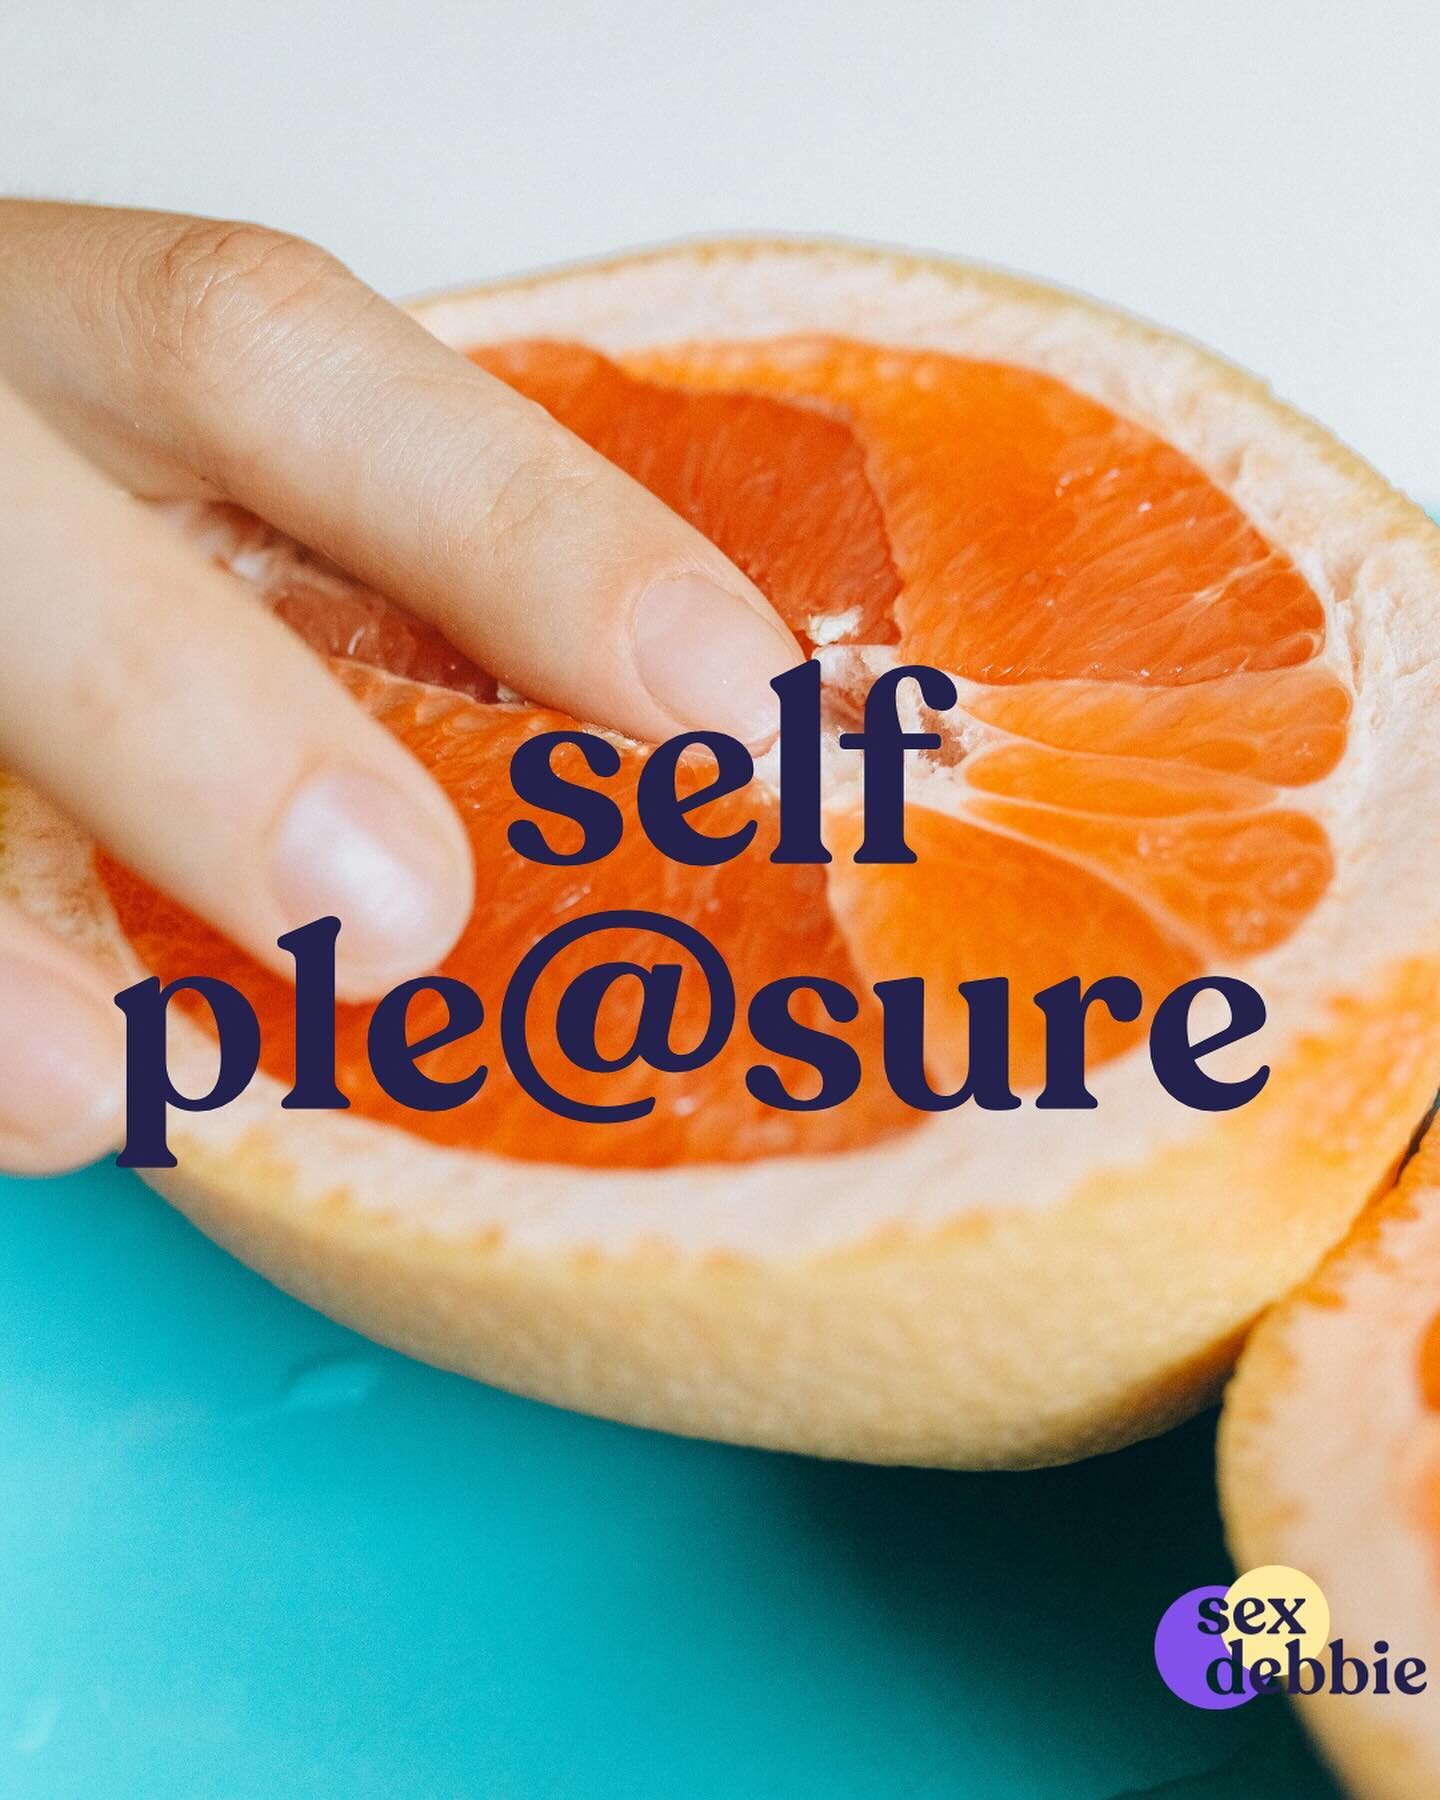 The p word here could get me banned.
But when p1e@sure should be the main reason for which most of have s*x why are we ashamed of it? Why is it the word banned on here and what stops us from exploring it?

#selflove #sexpositiveeducation #relationshi